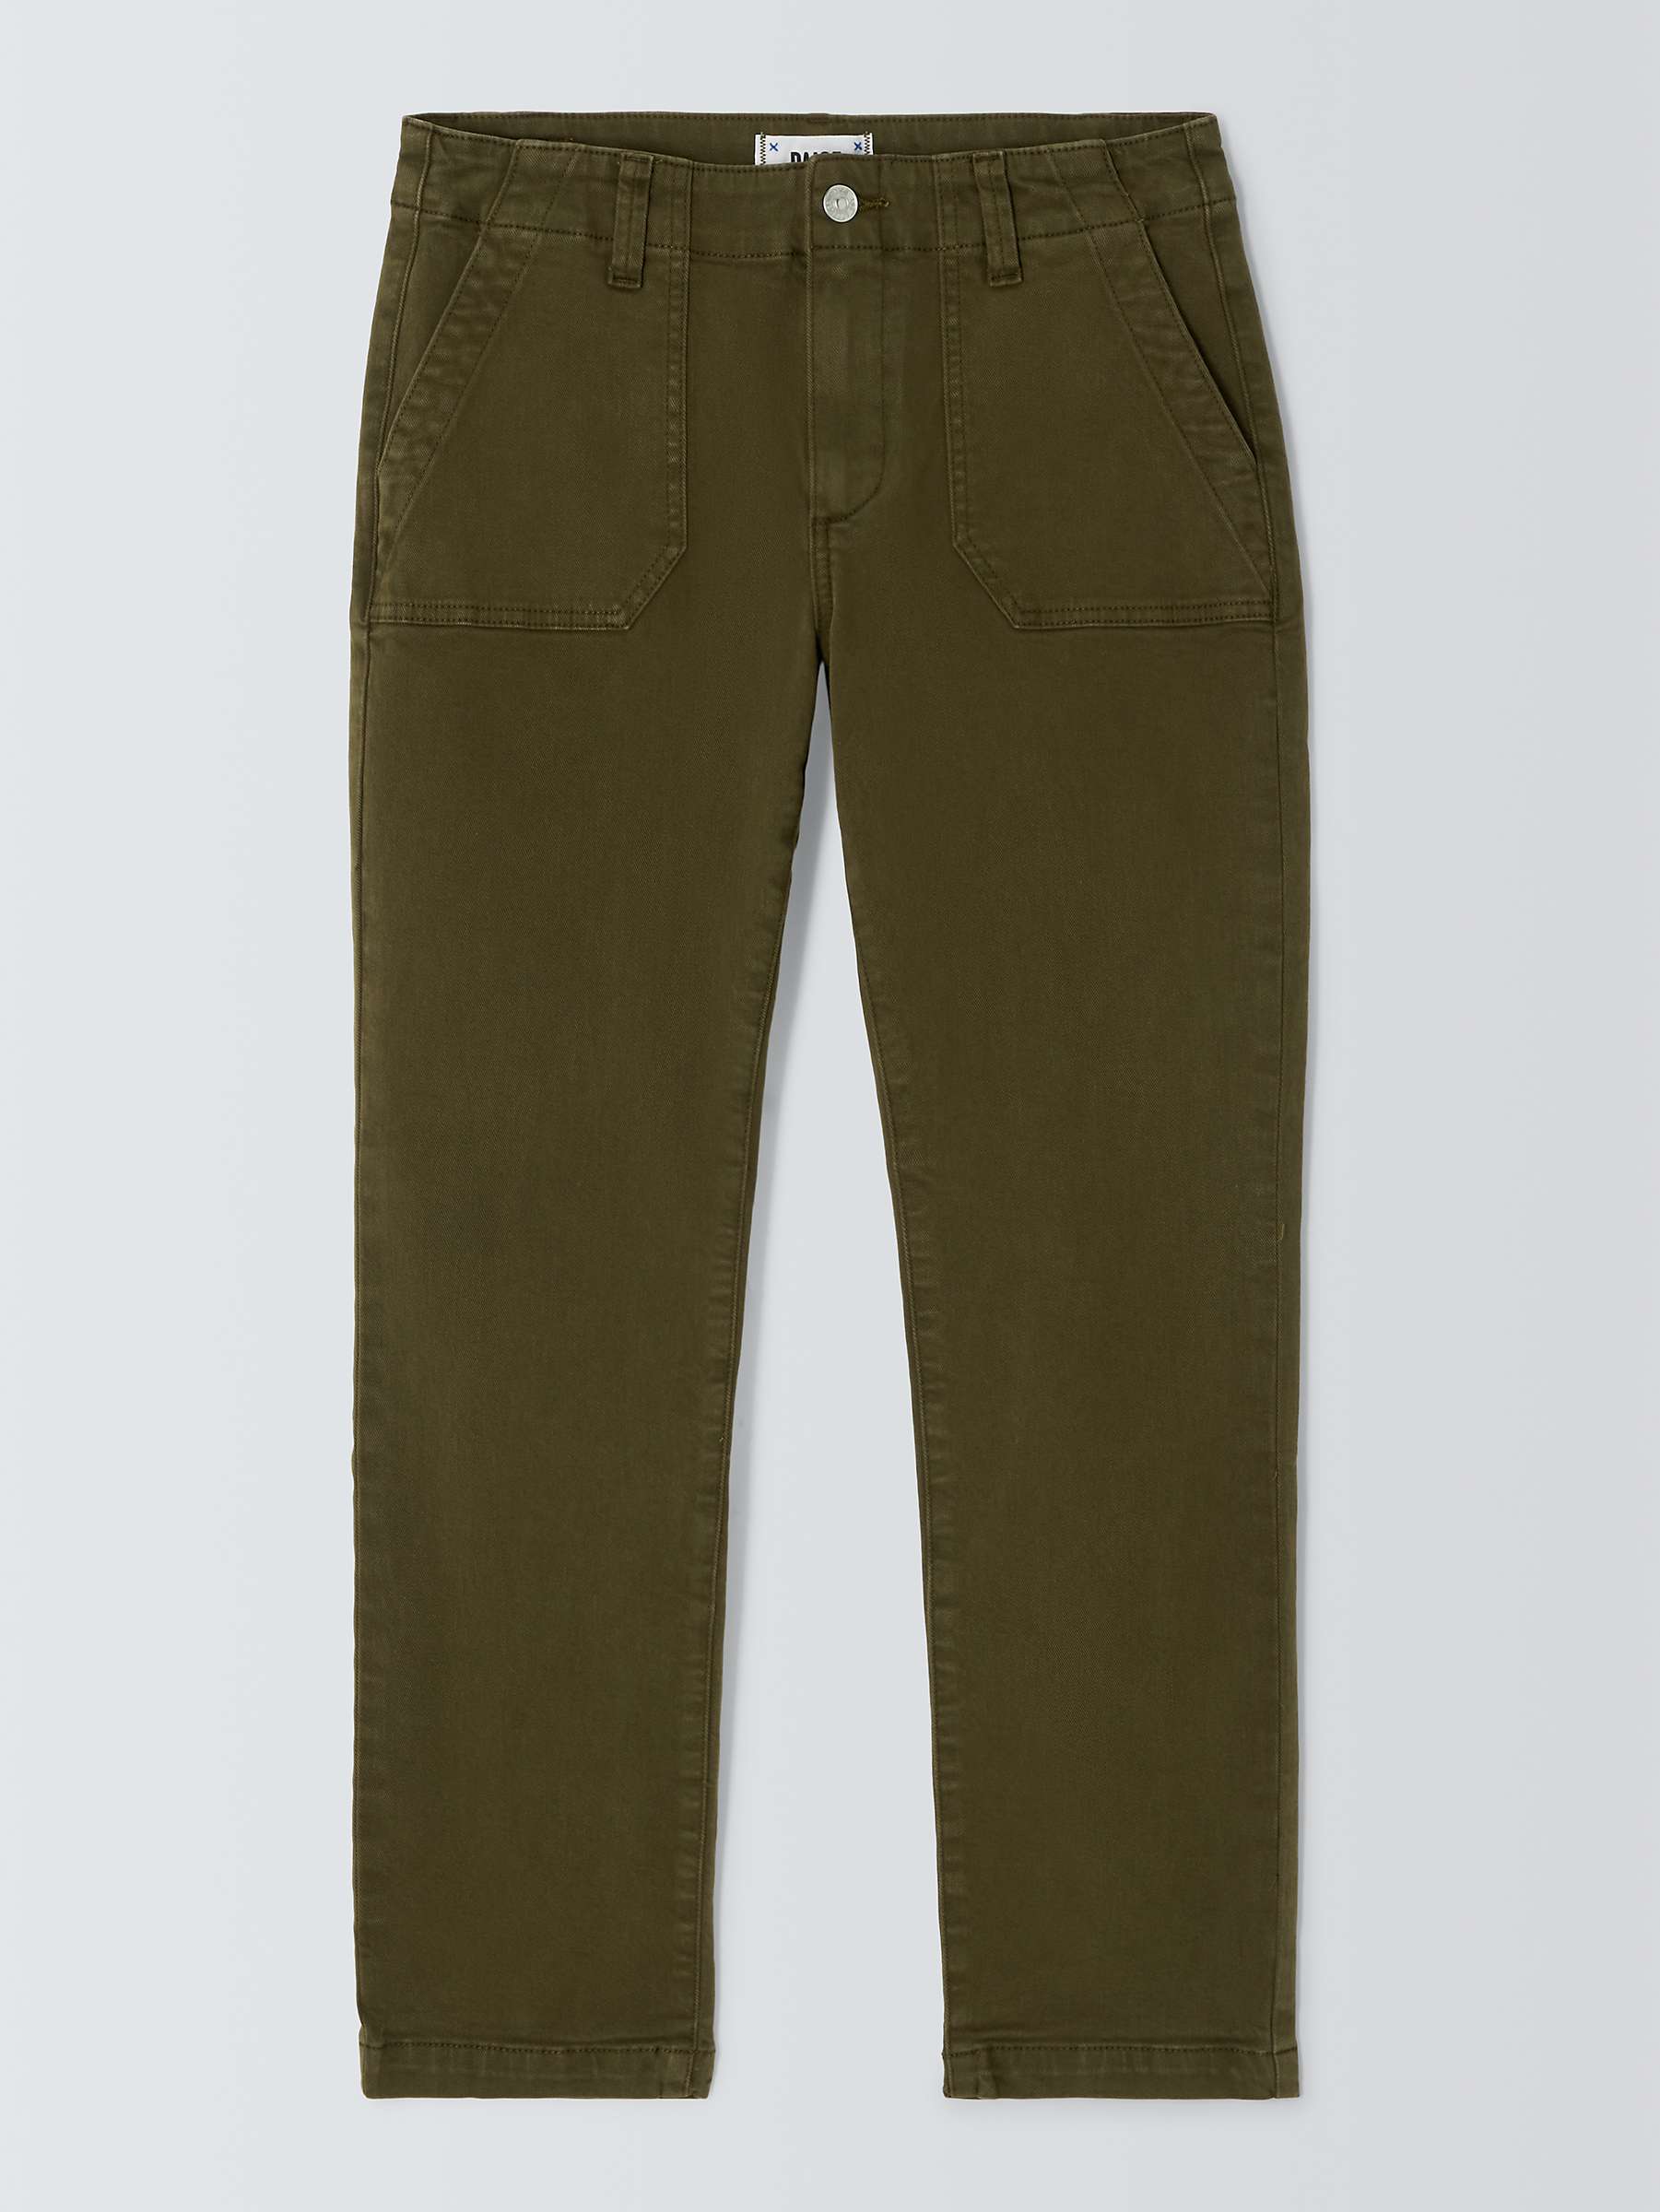 Buy PAIGE Mayslie Straight Leg Ankle Length Trousers, Vintage Olive Meadow Online at johnlewis.com